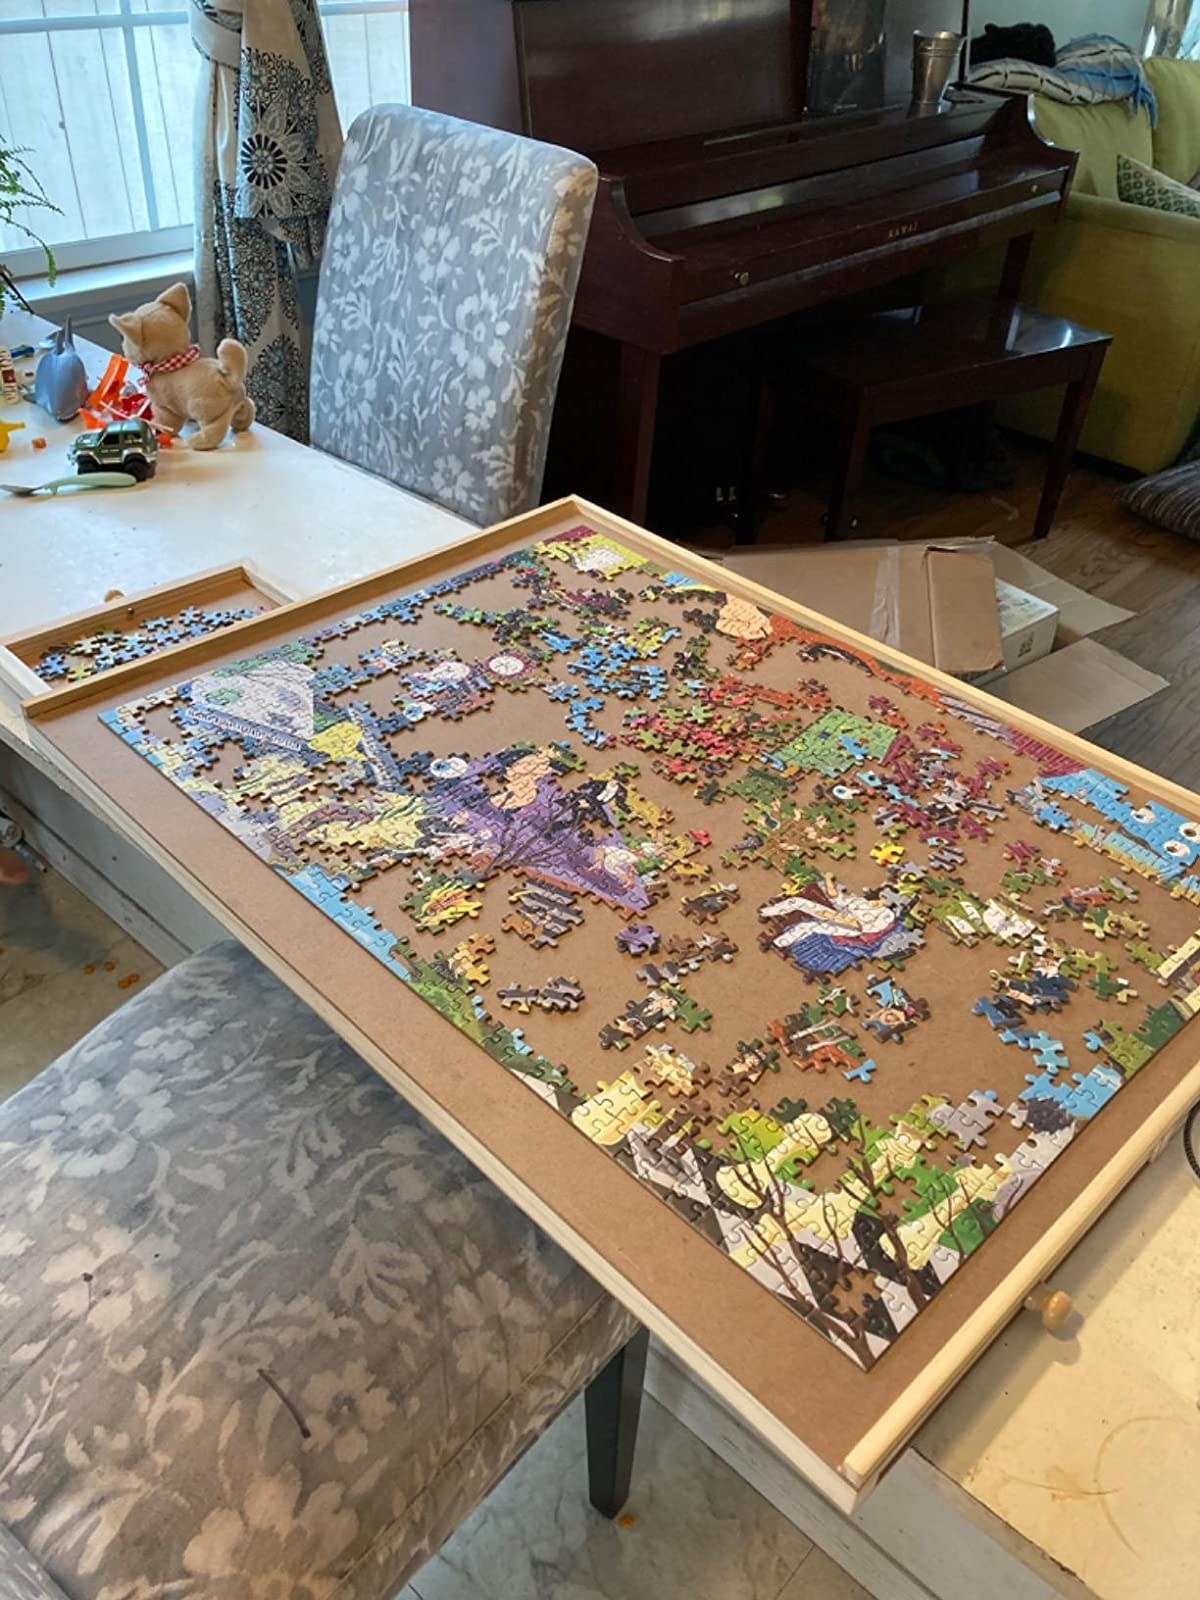 Puzzle board with partially completed puzzle on it and puzzle pieces in the drawers